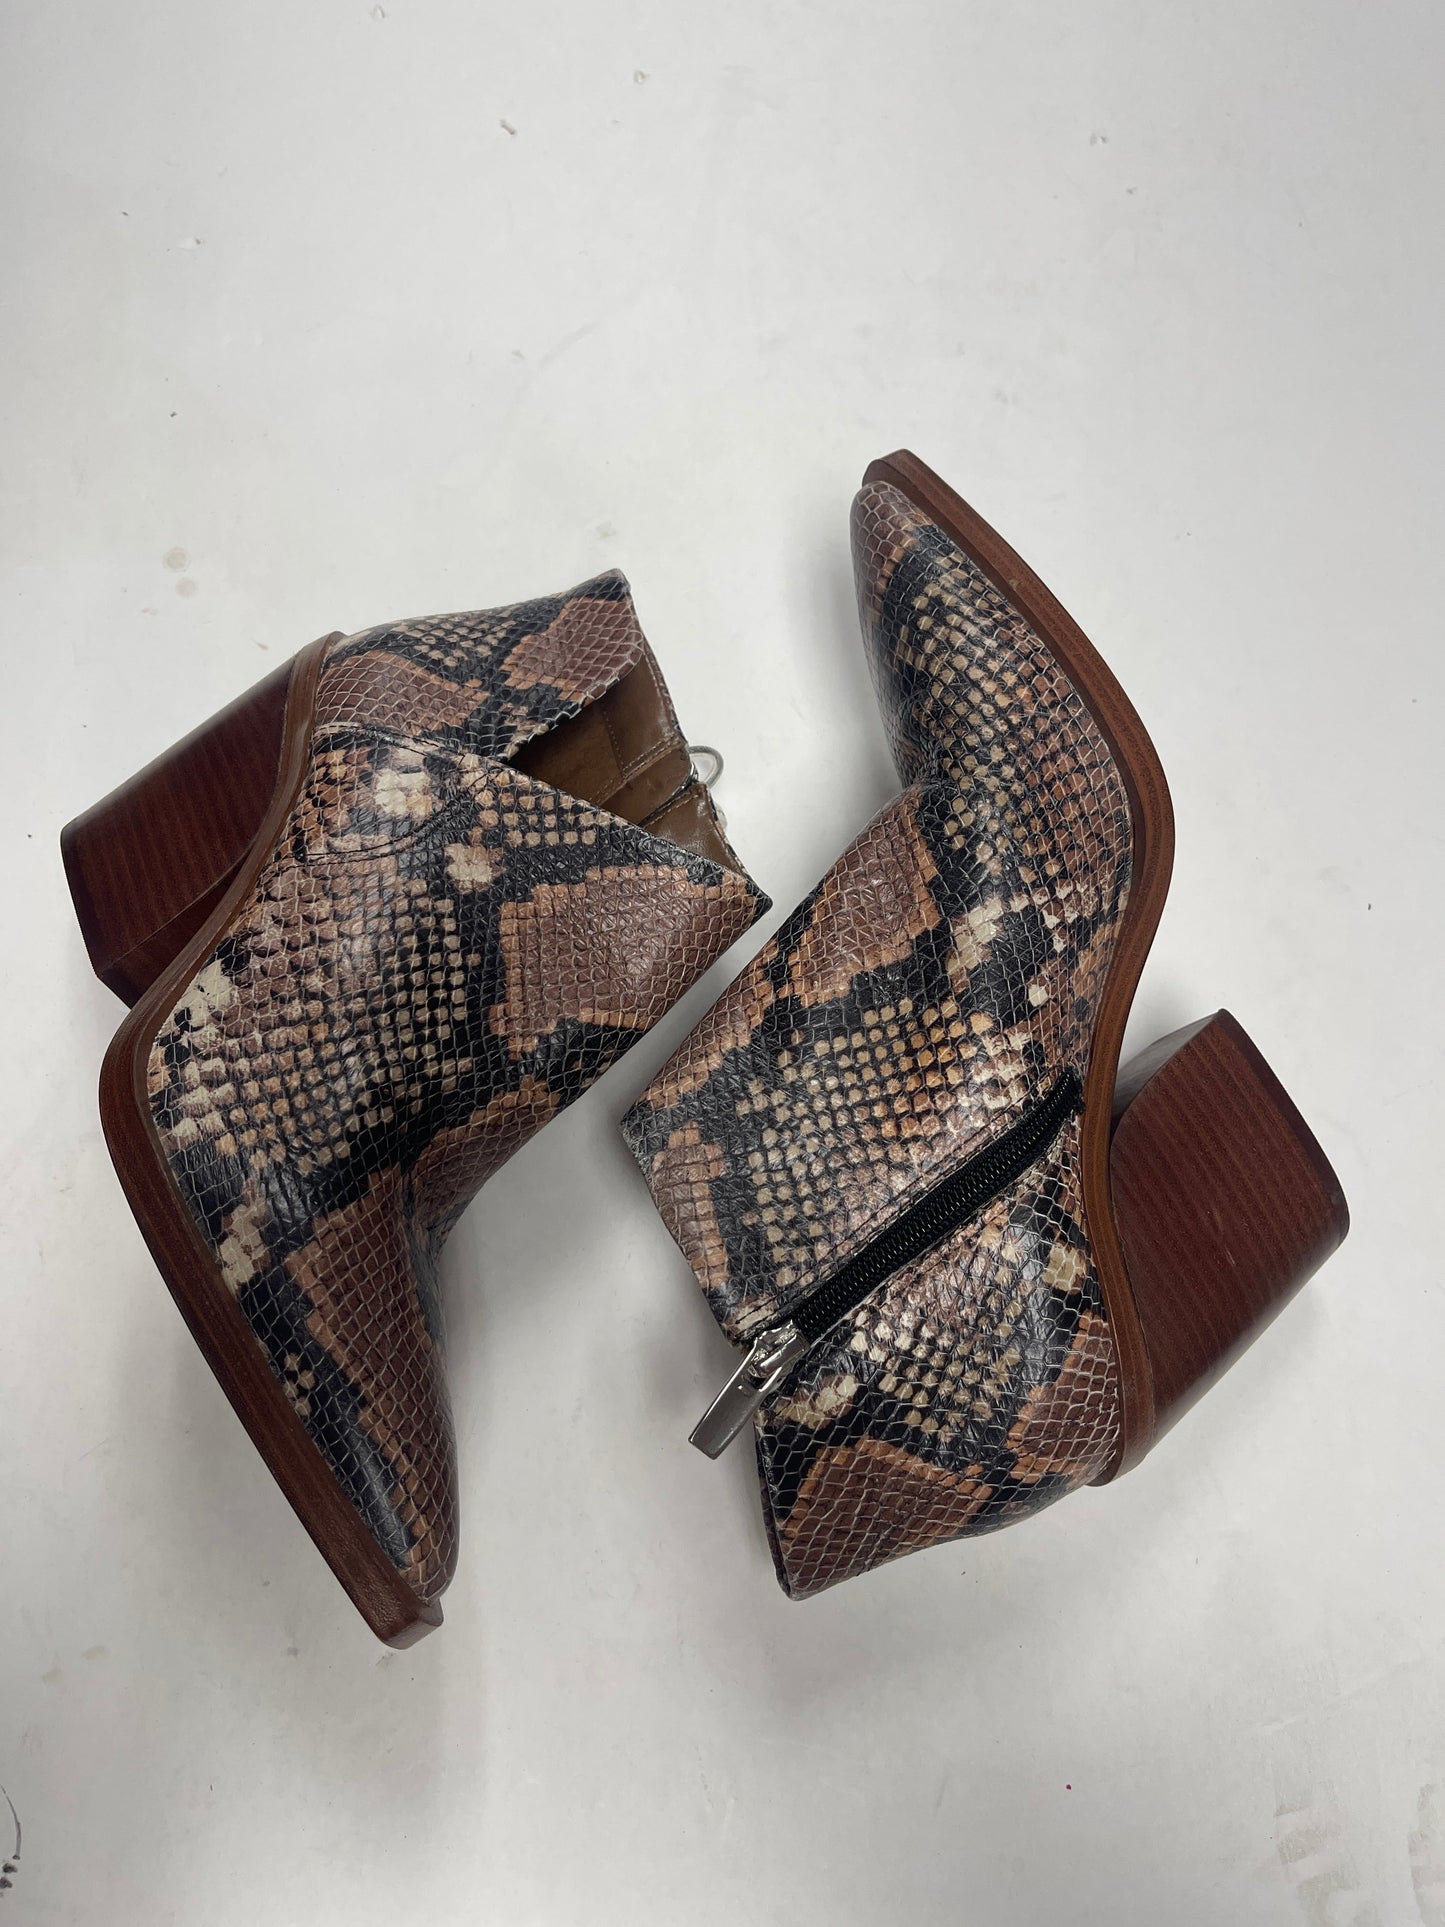 Snakeskin Print Boots Ankle Heels Vince Camuto, Size 7.5